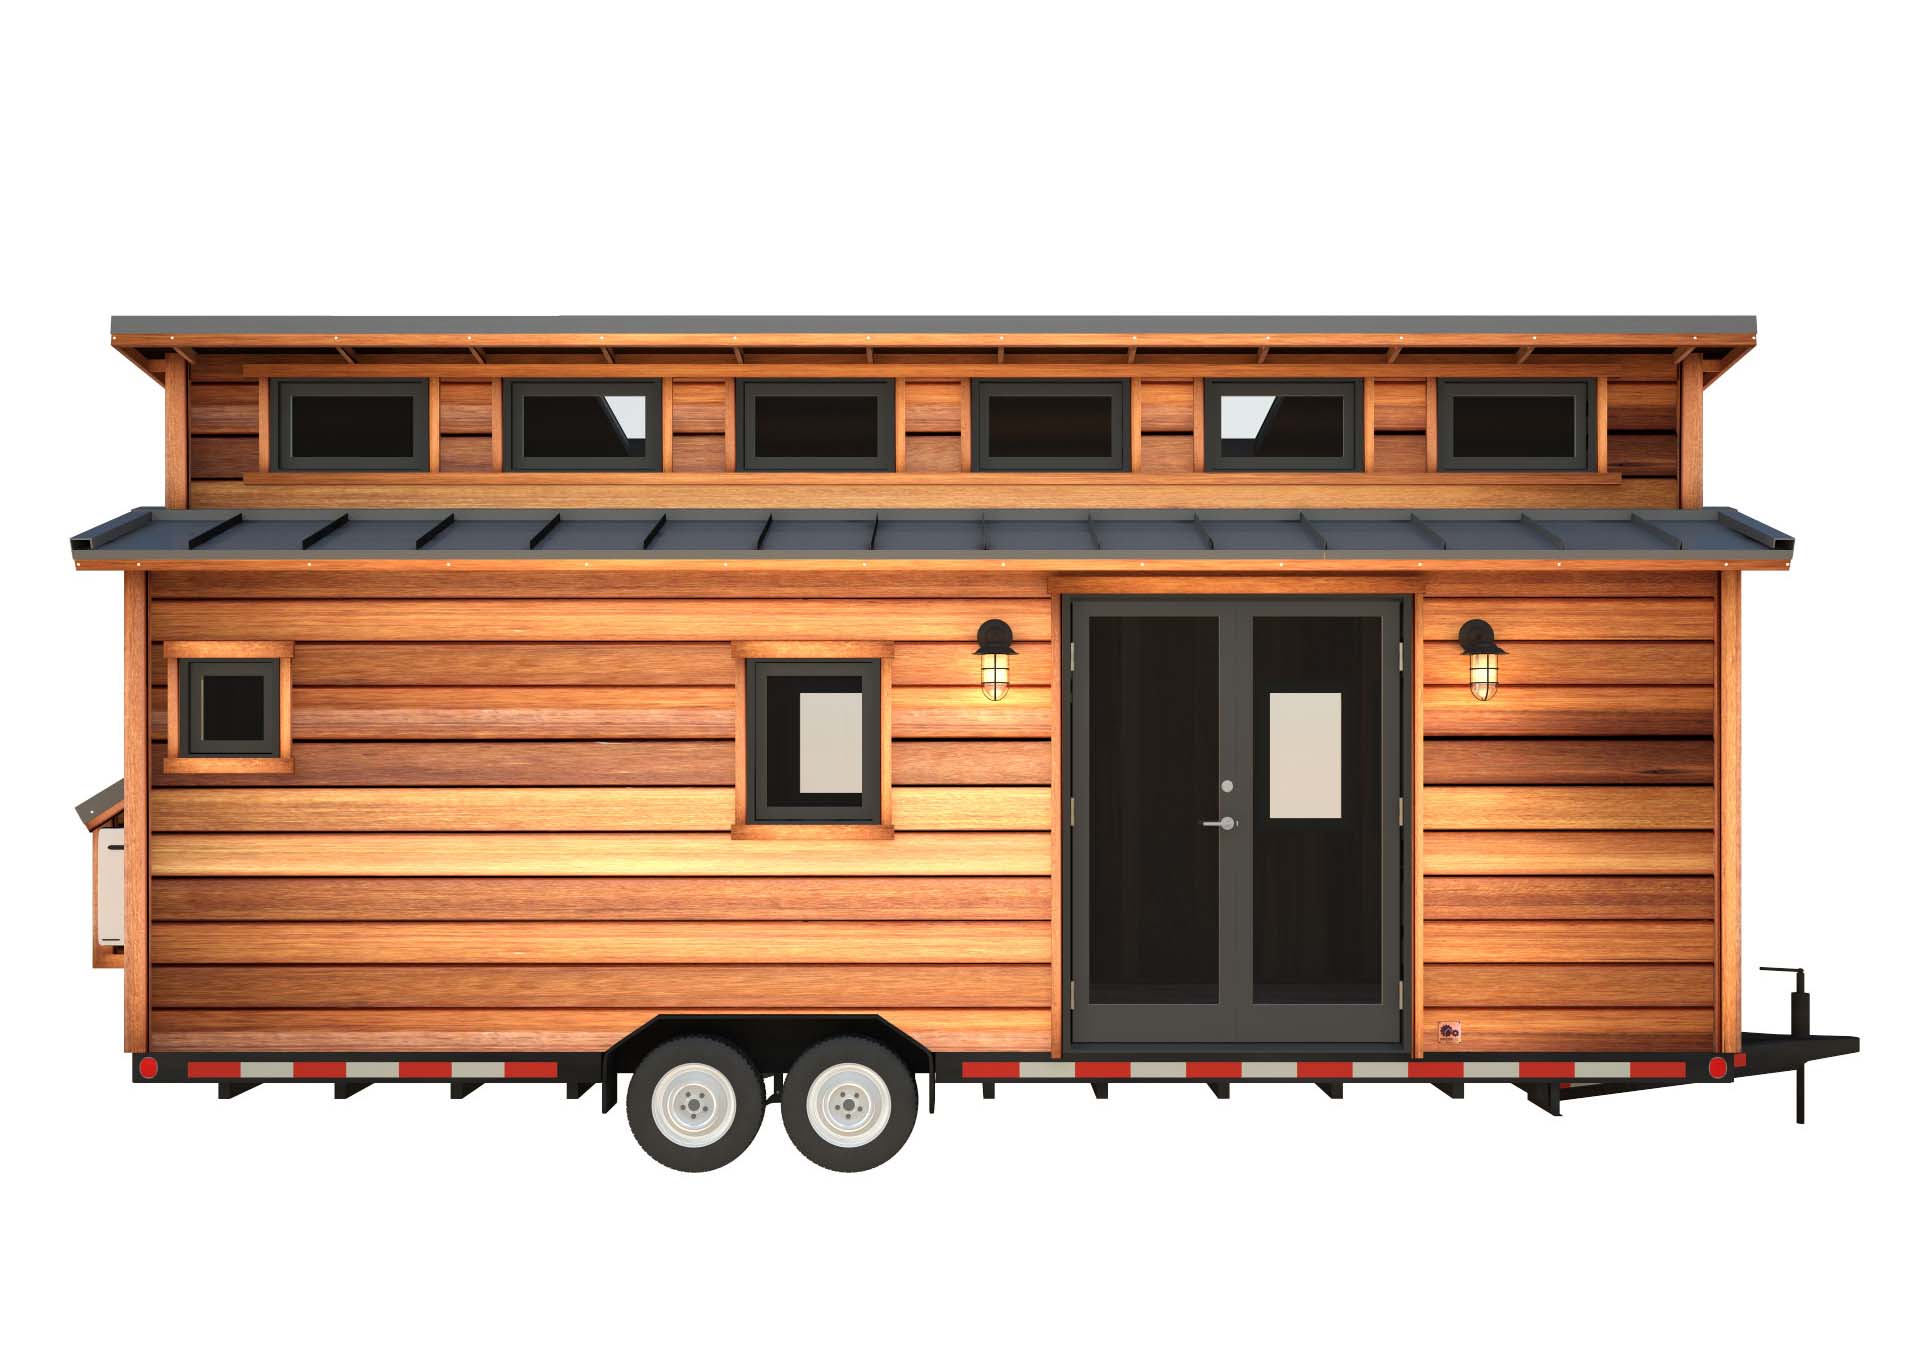 The Cider Box Modern Tiny  House  Plans  for Your Home  on Wheels 